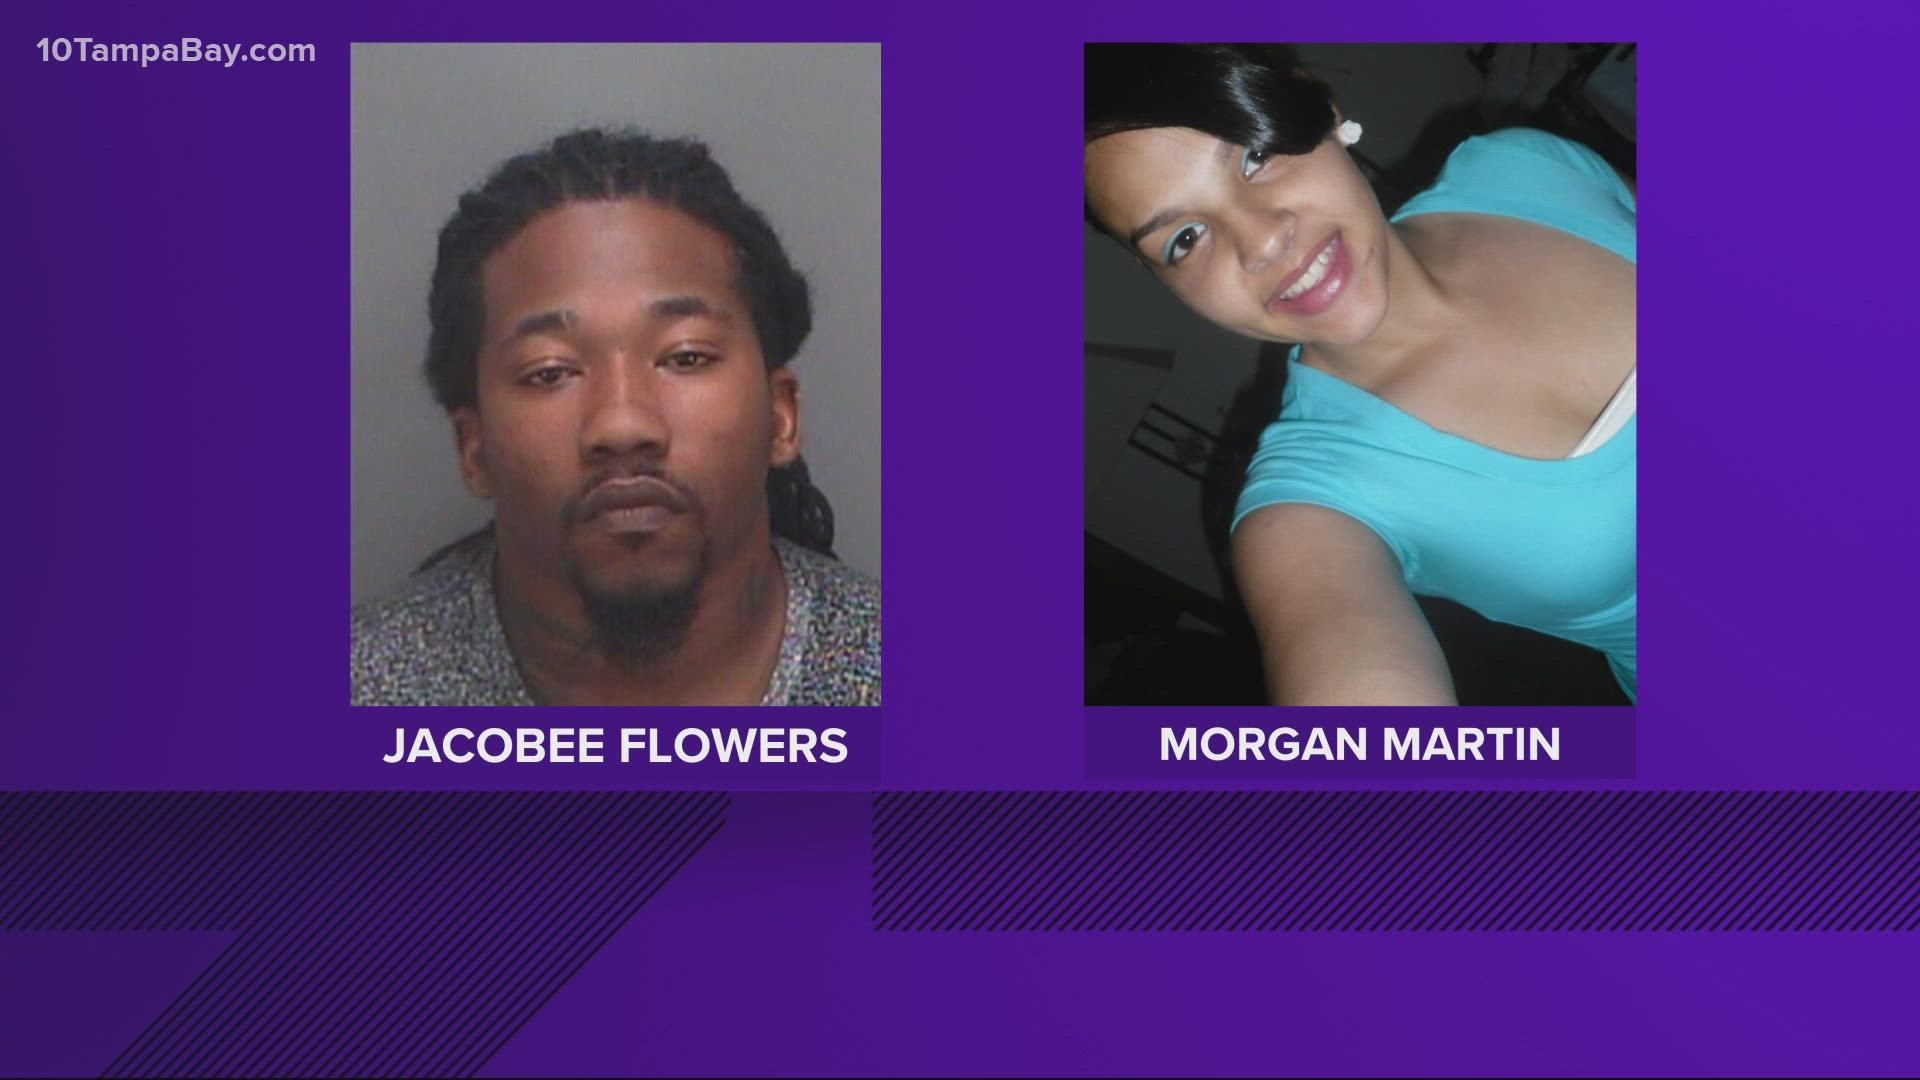 17-year-old Morgan Martin disappeared in 2012. Her boyfriend Jacobee Flowers was indicted for her murder.